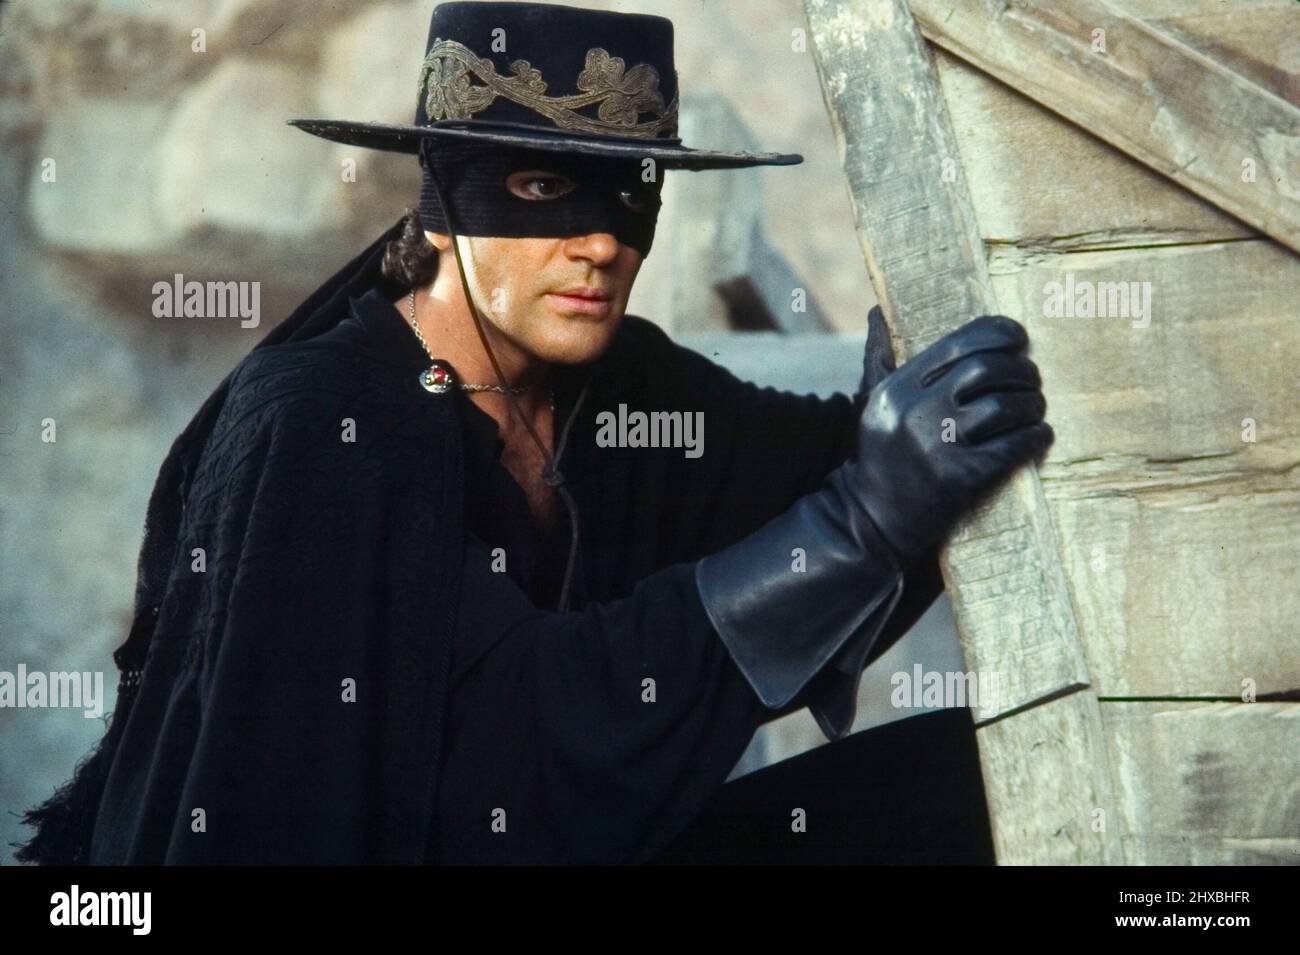 ANTONIO BANDERAS in THE MASK OF ZORRO (1998), directed by MARTIN CAMPBELL.  Credit: AMBLIN ENTERTAINMENT / Album Stock Photo - Alamy